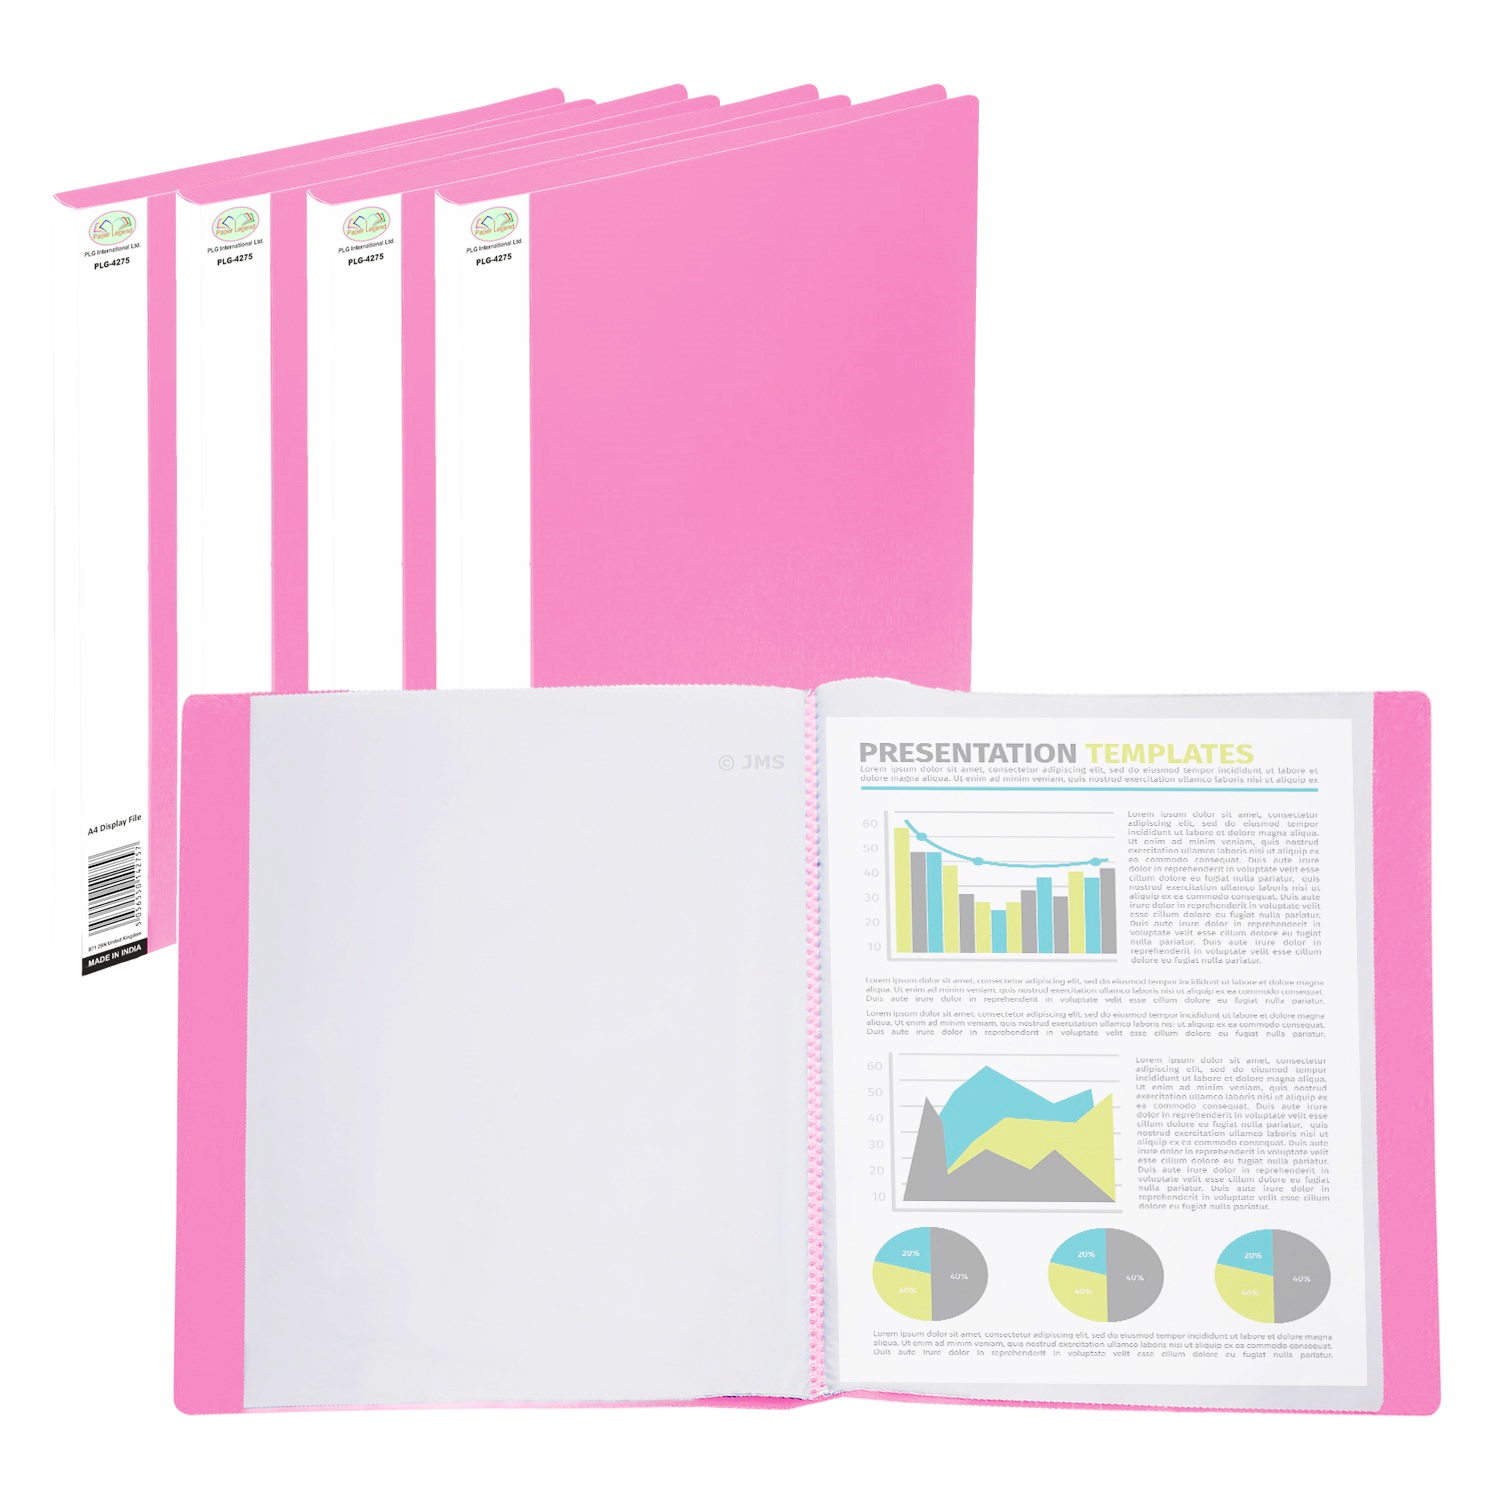 A4 Display Folder 20 Pockets Flexi Cover Presentation Book Files Pink Bulk Pack of 50, Portfolio Professional Display Certificate Holder Plastic Case 40 View Pages 